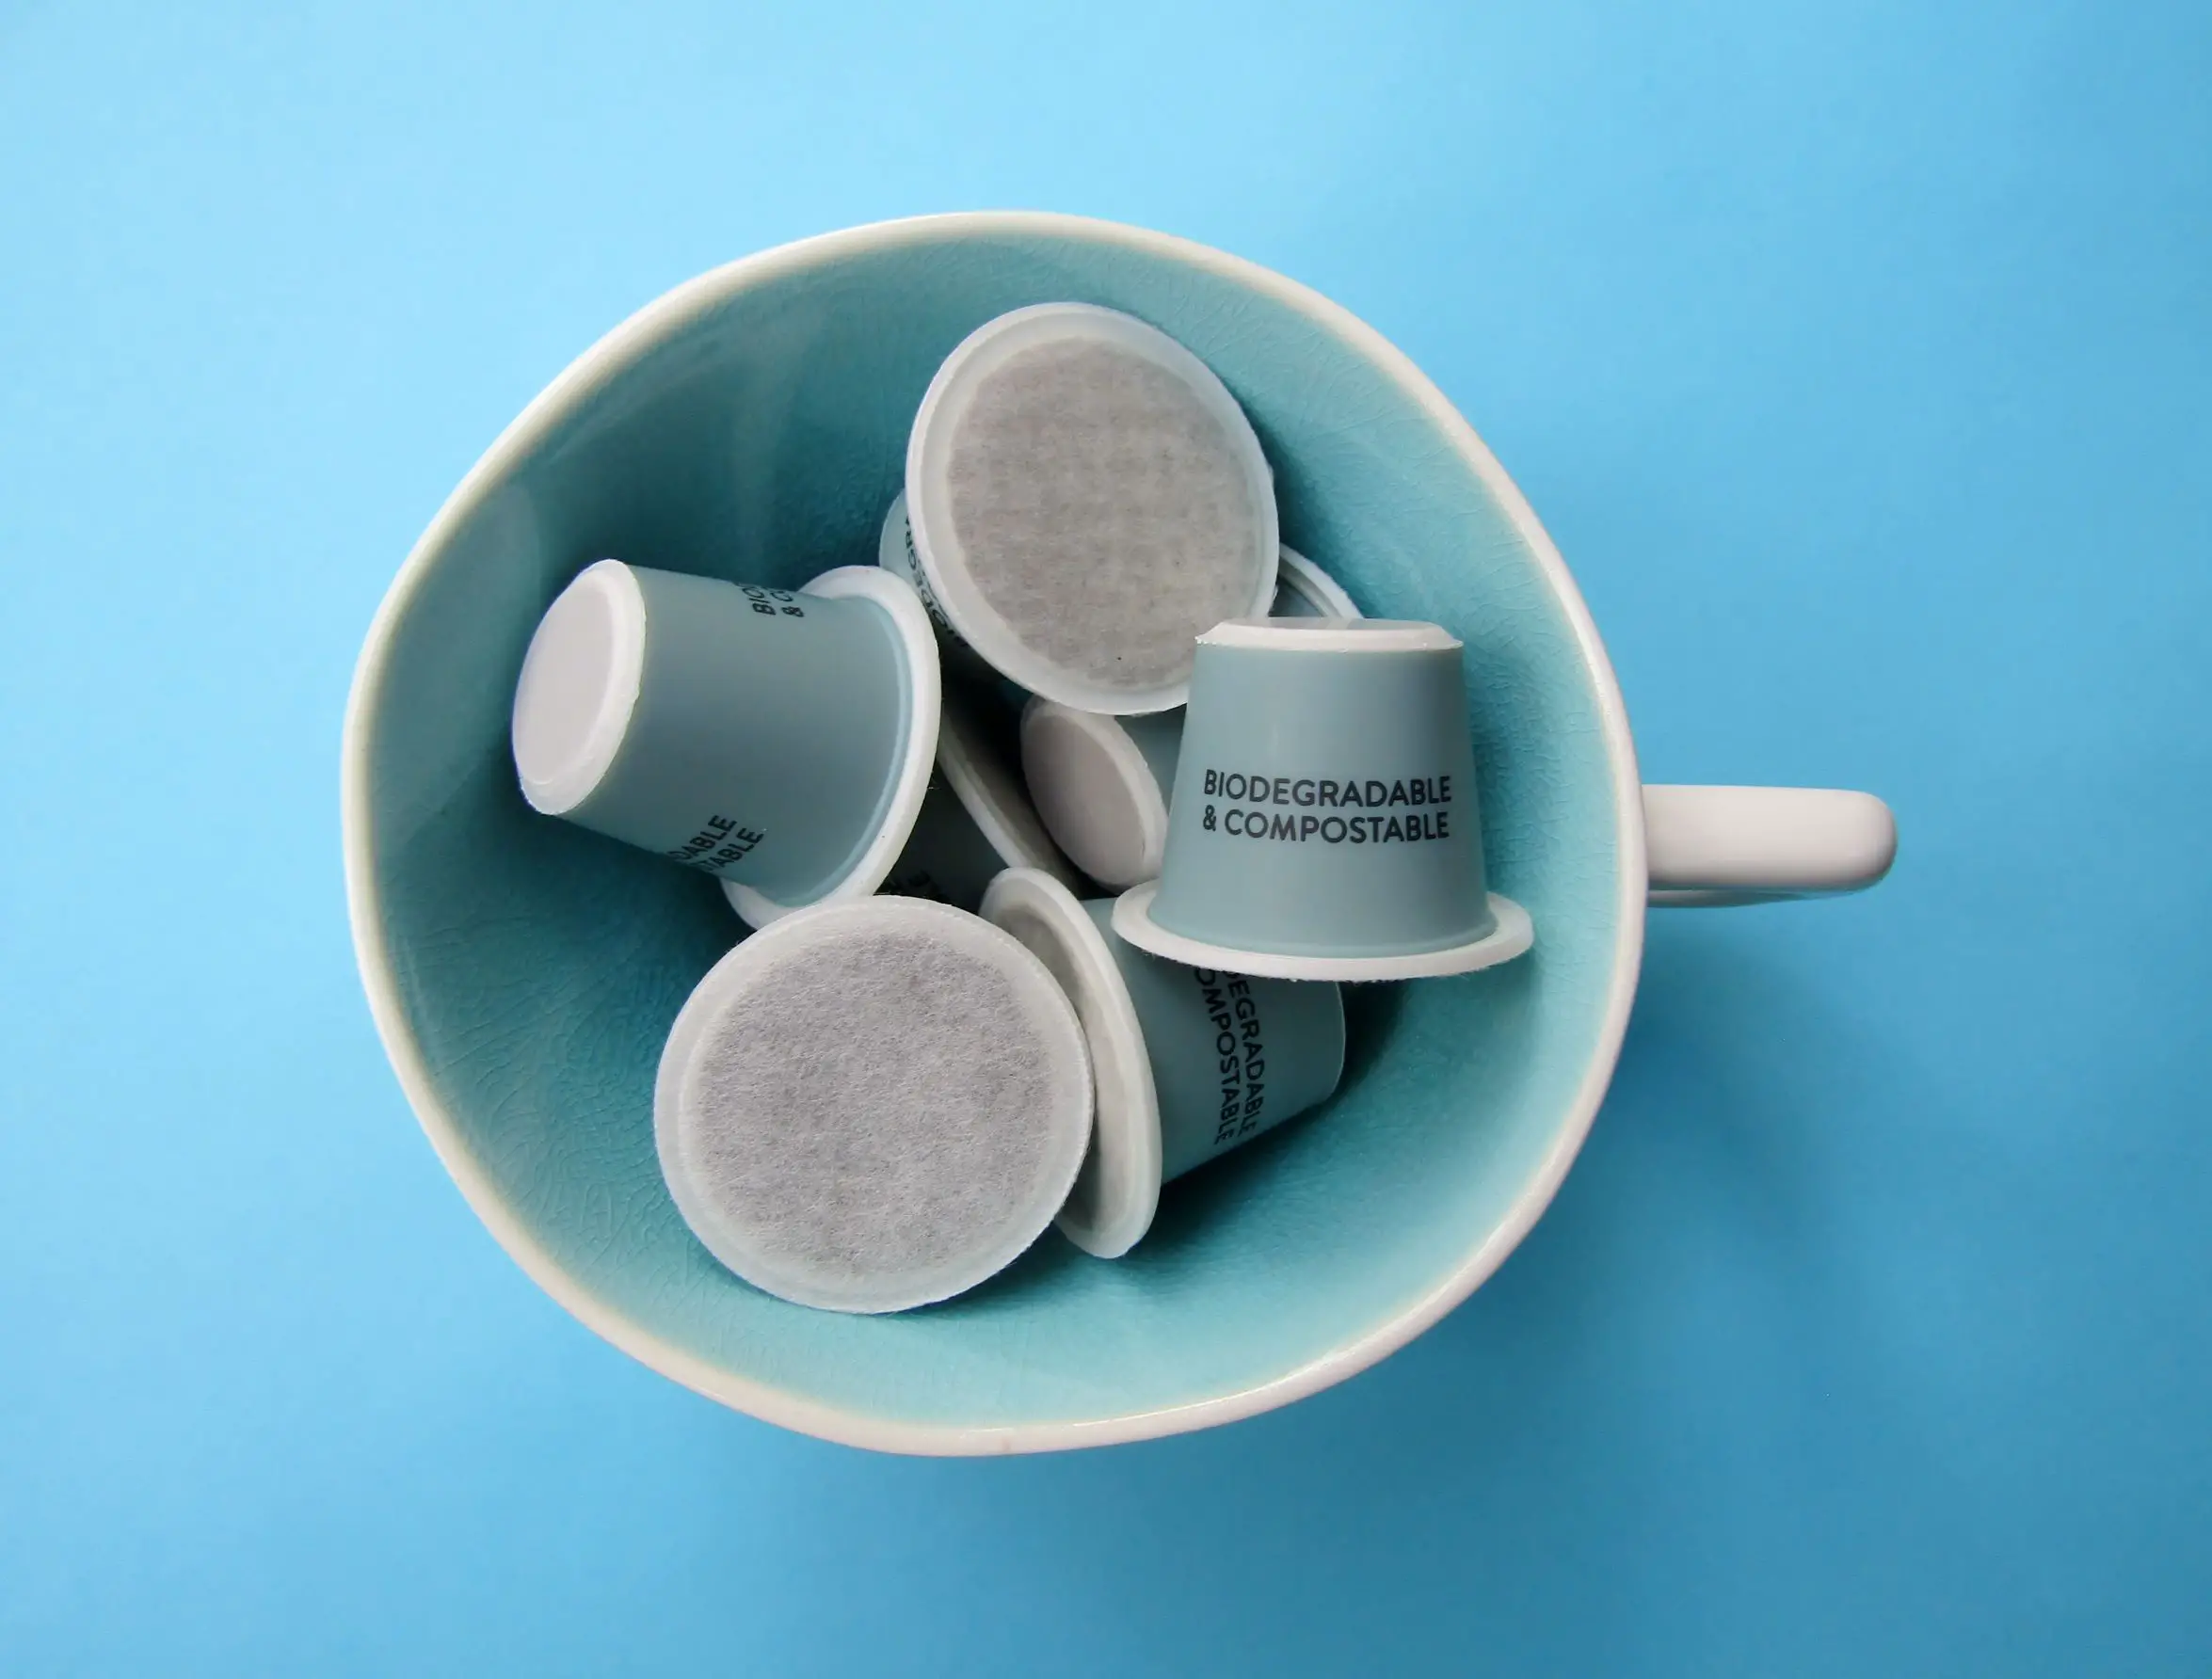 Are Biodegradable Coffee Pods Eco-Friendly? 9 Crucial Facts